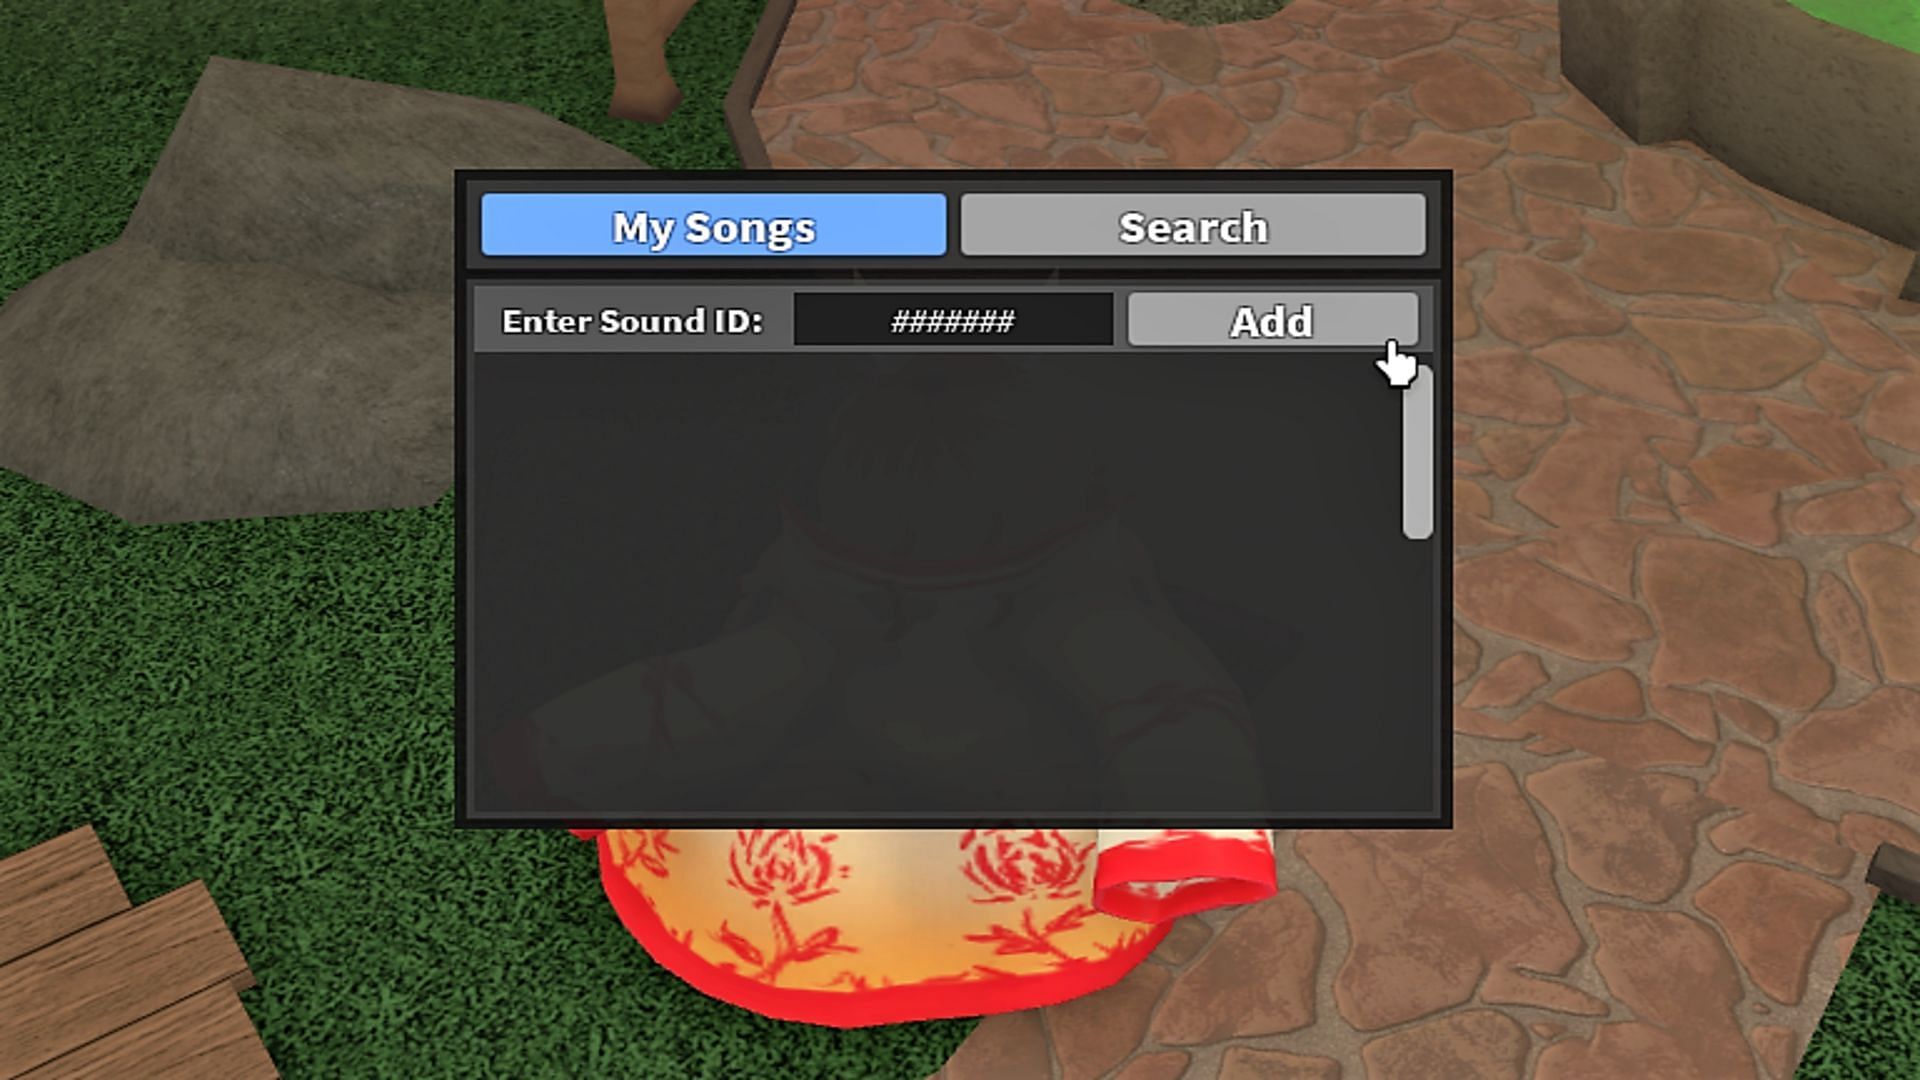 Fill that music list to play with great songs. (Picture via Roblox)